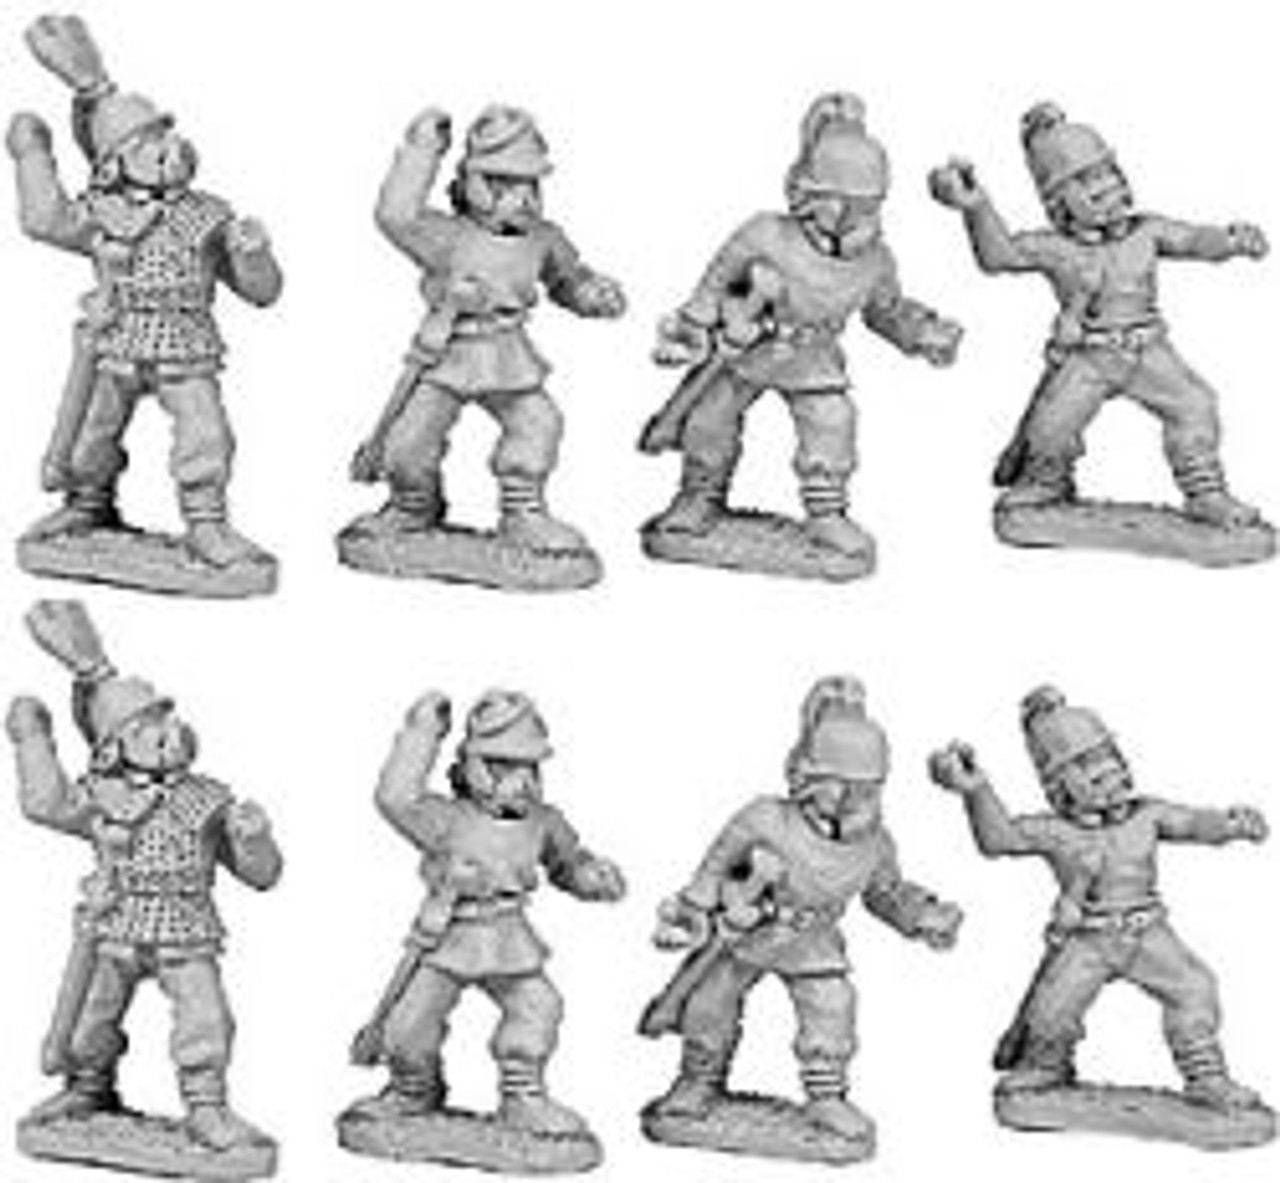 XYS18251 - Gallic Warband with spears (8)